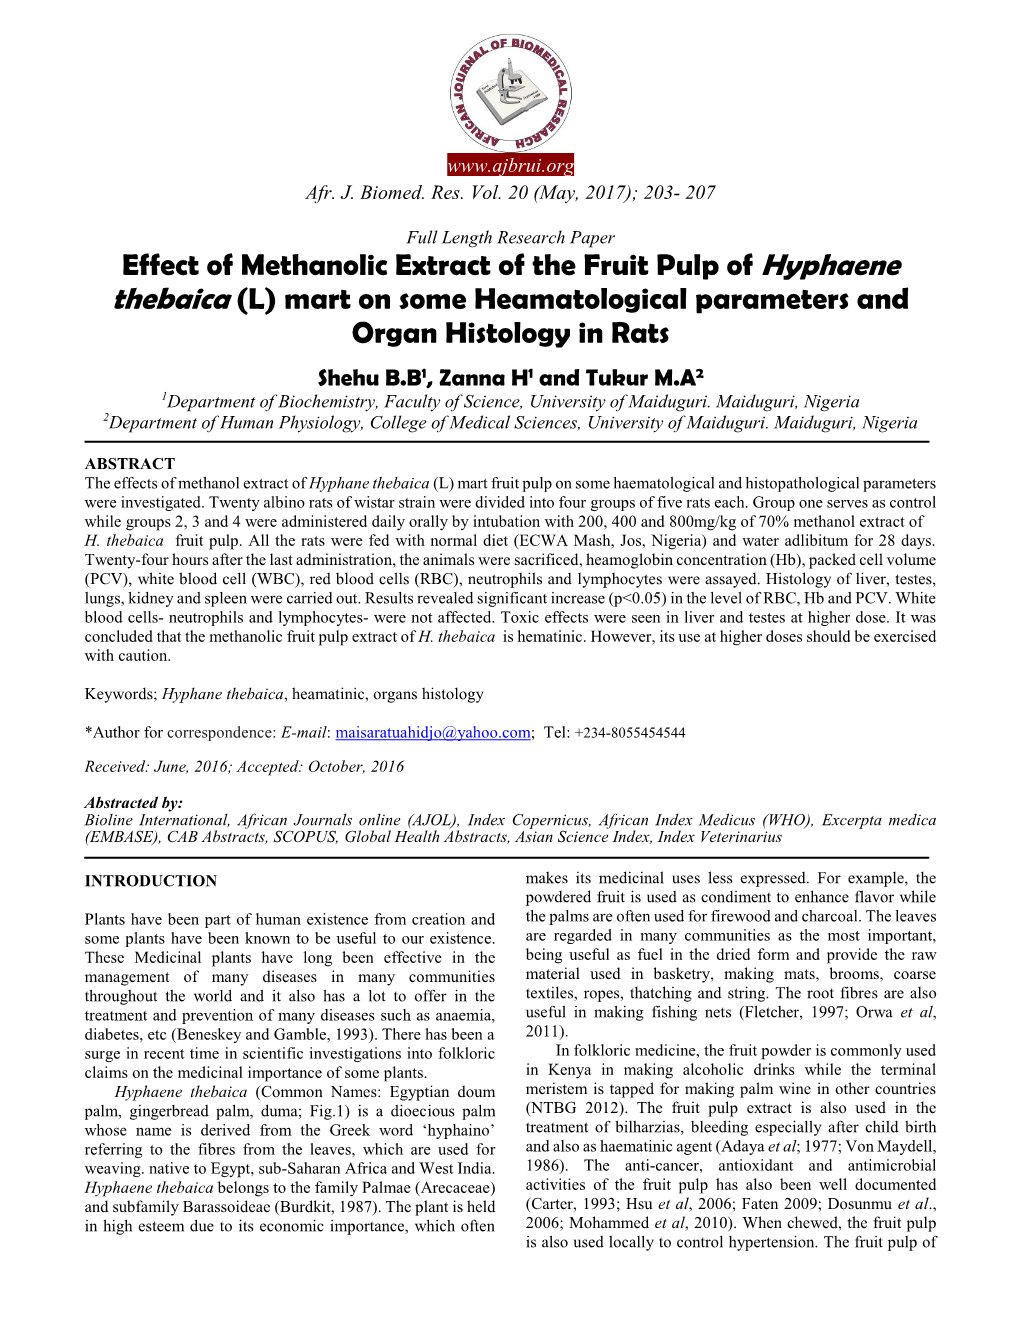 Effect of Methanolic Extract of the Fruit Pulp of Hyphaene Thebaica (L) Mart on Some Heamatological Parameters and Organ Histology in Rats